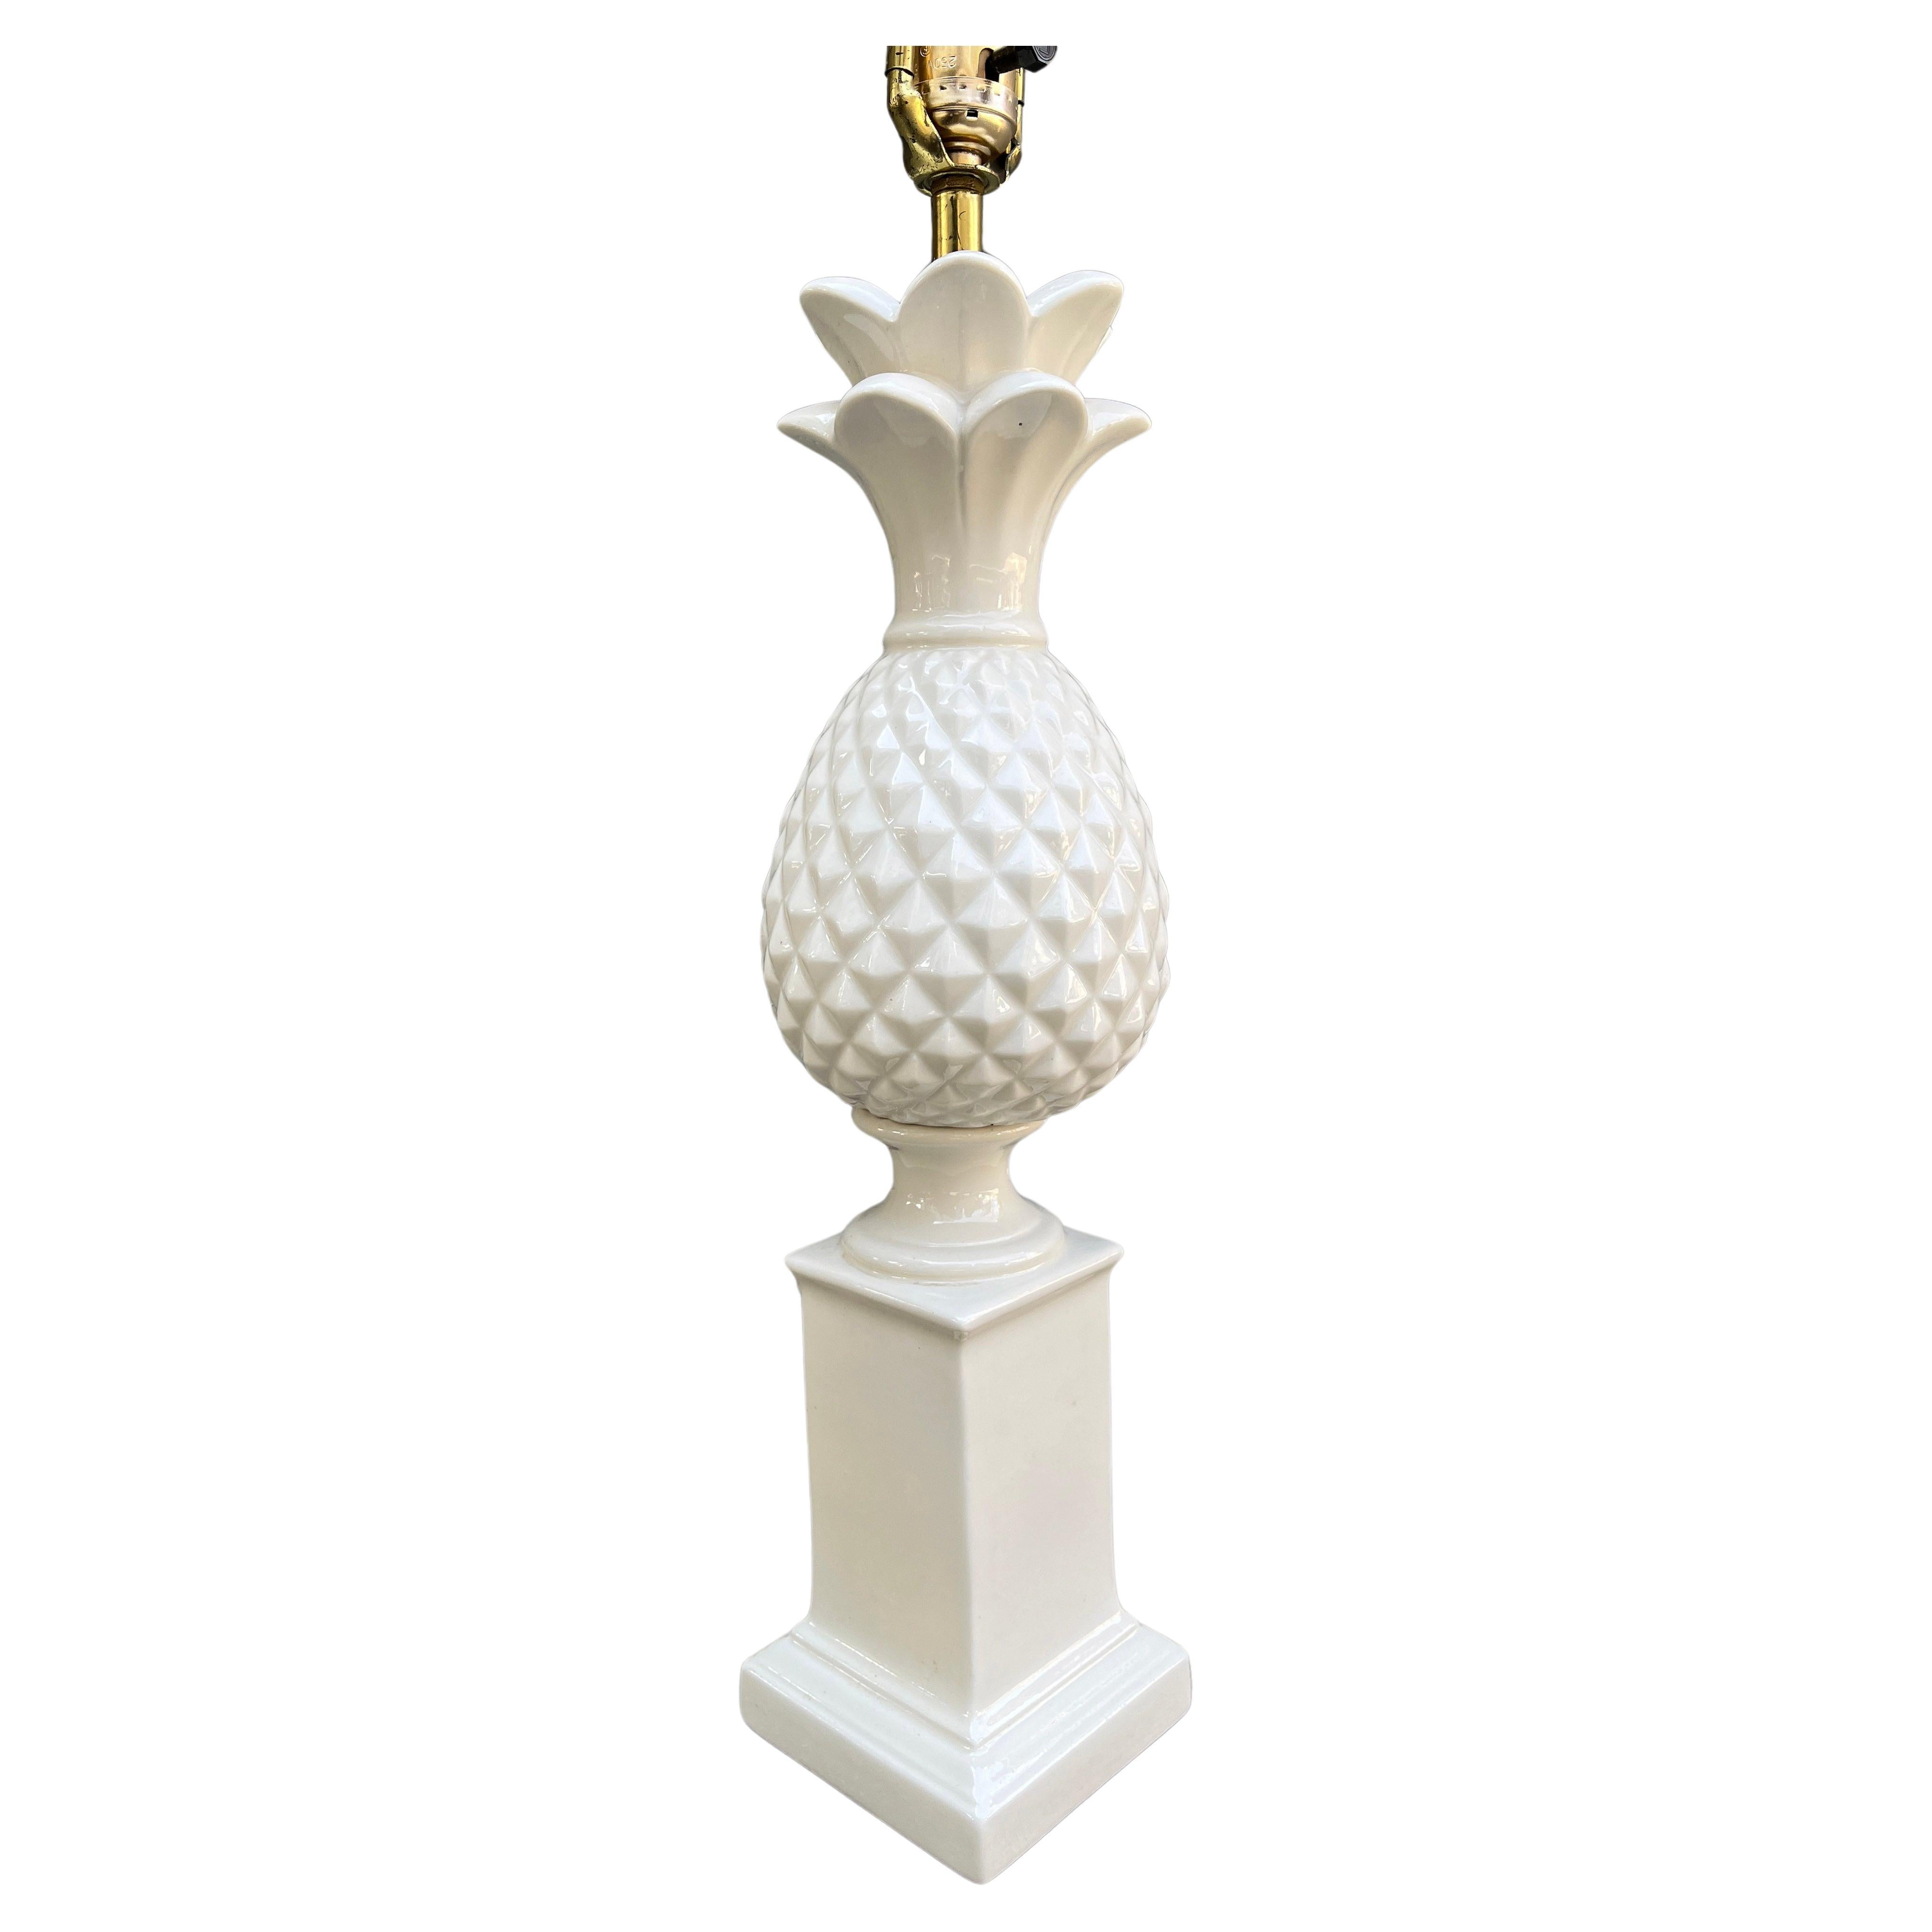 A classic and iconic decorative table lamps in the shape of pineapples. Made in Italy in the 70s in a soft white glazed ceramic. 